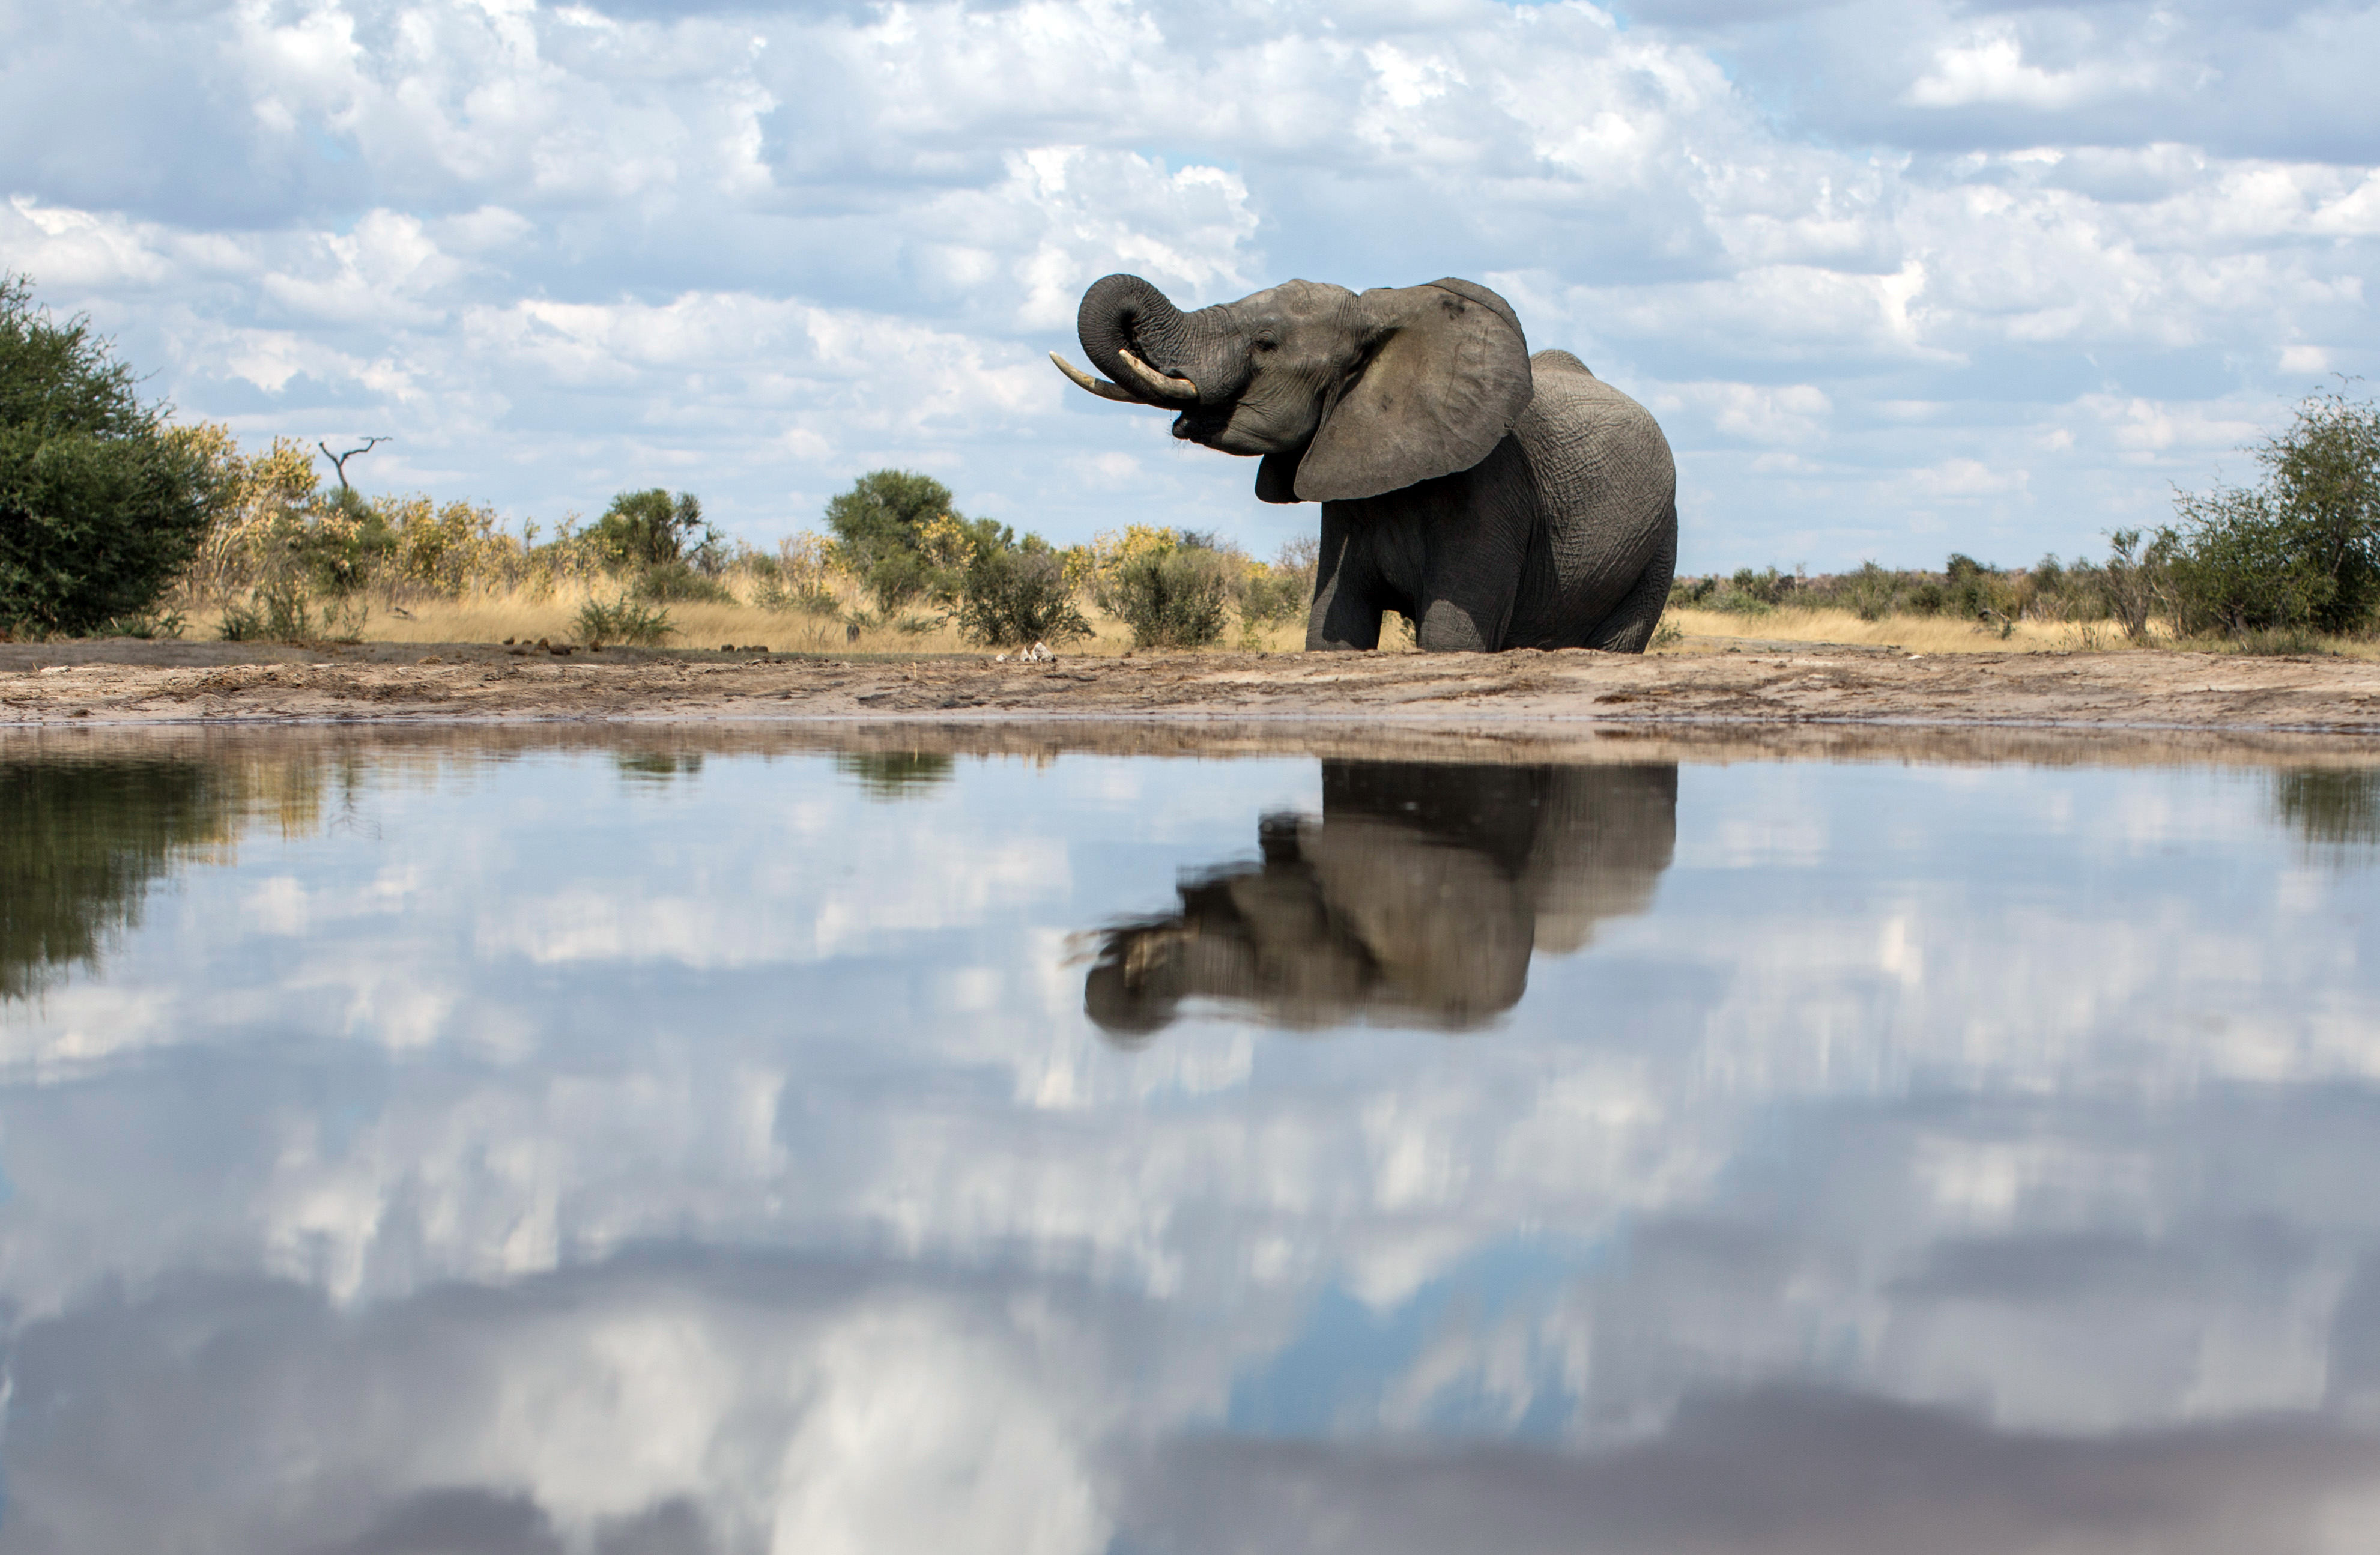 Elephant at a waterhole in Khaudum National Park in Namibia